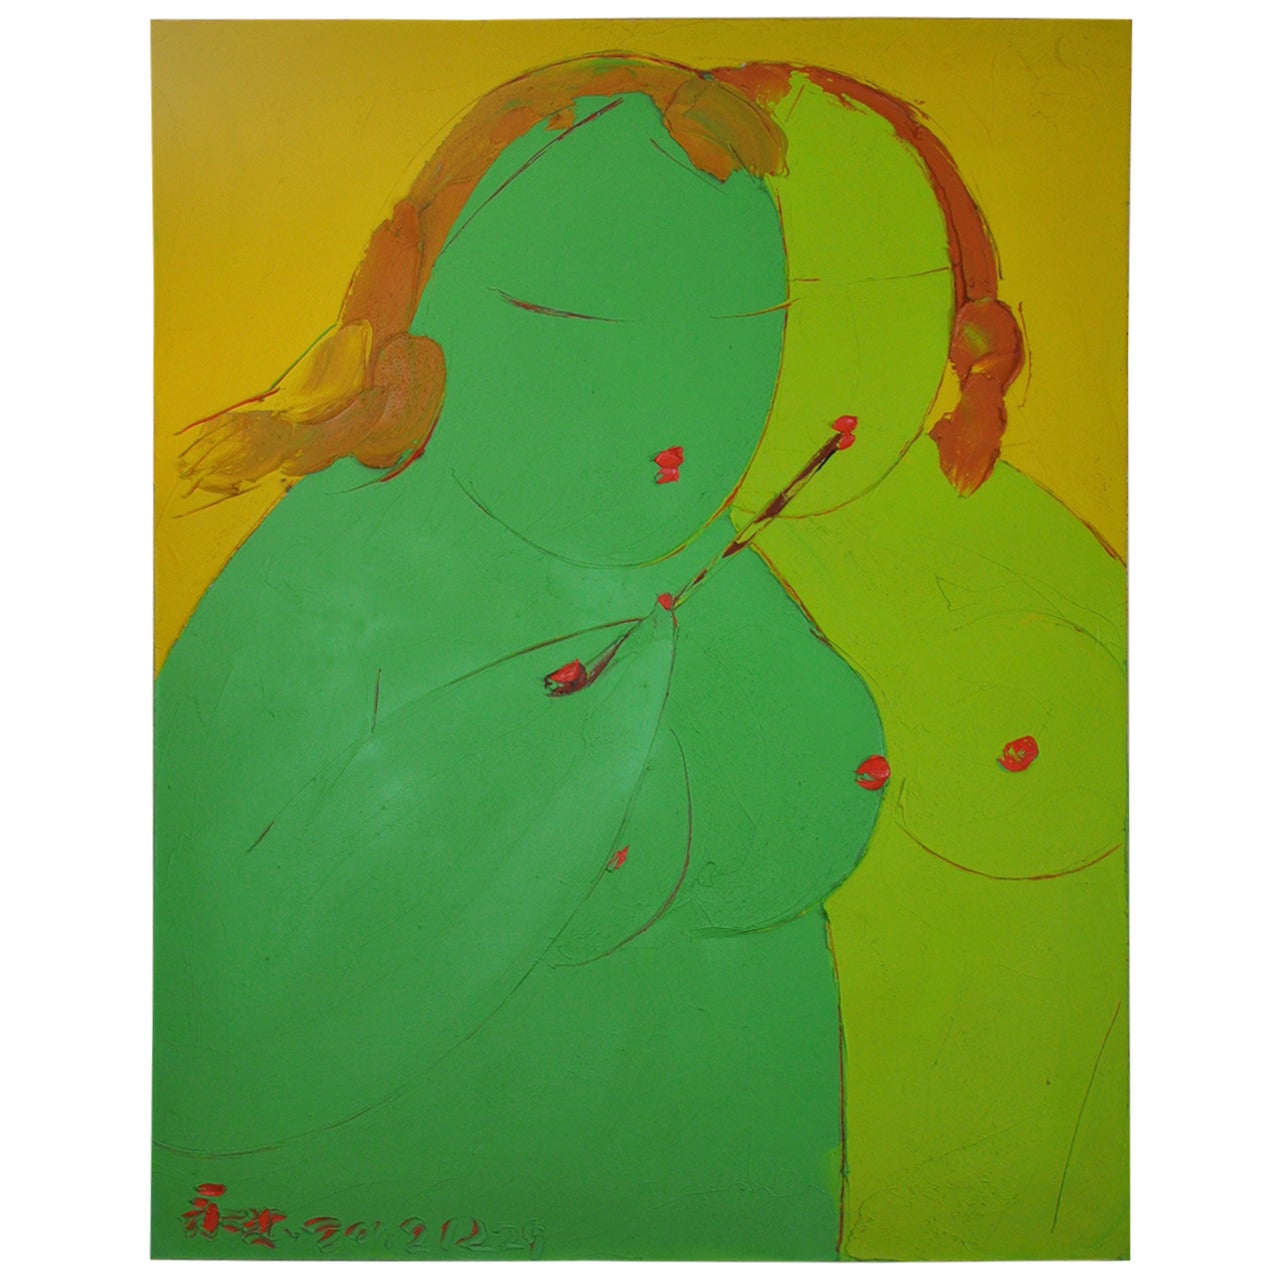 Pang Yongjie, "Fat Women Number 1" Painting For Sale